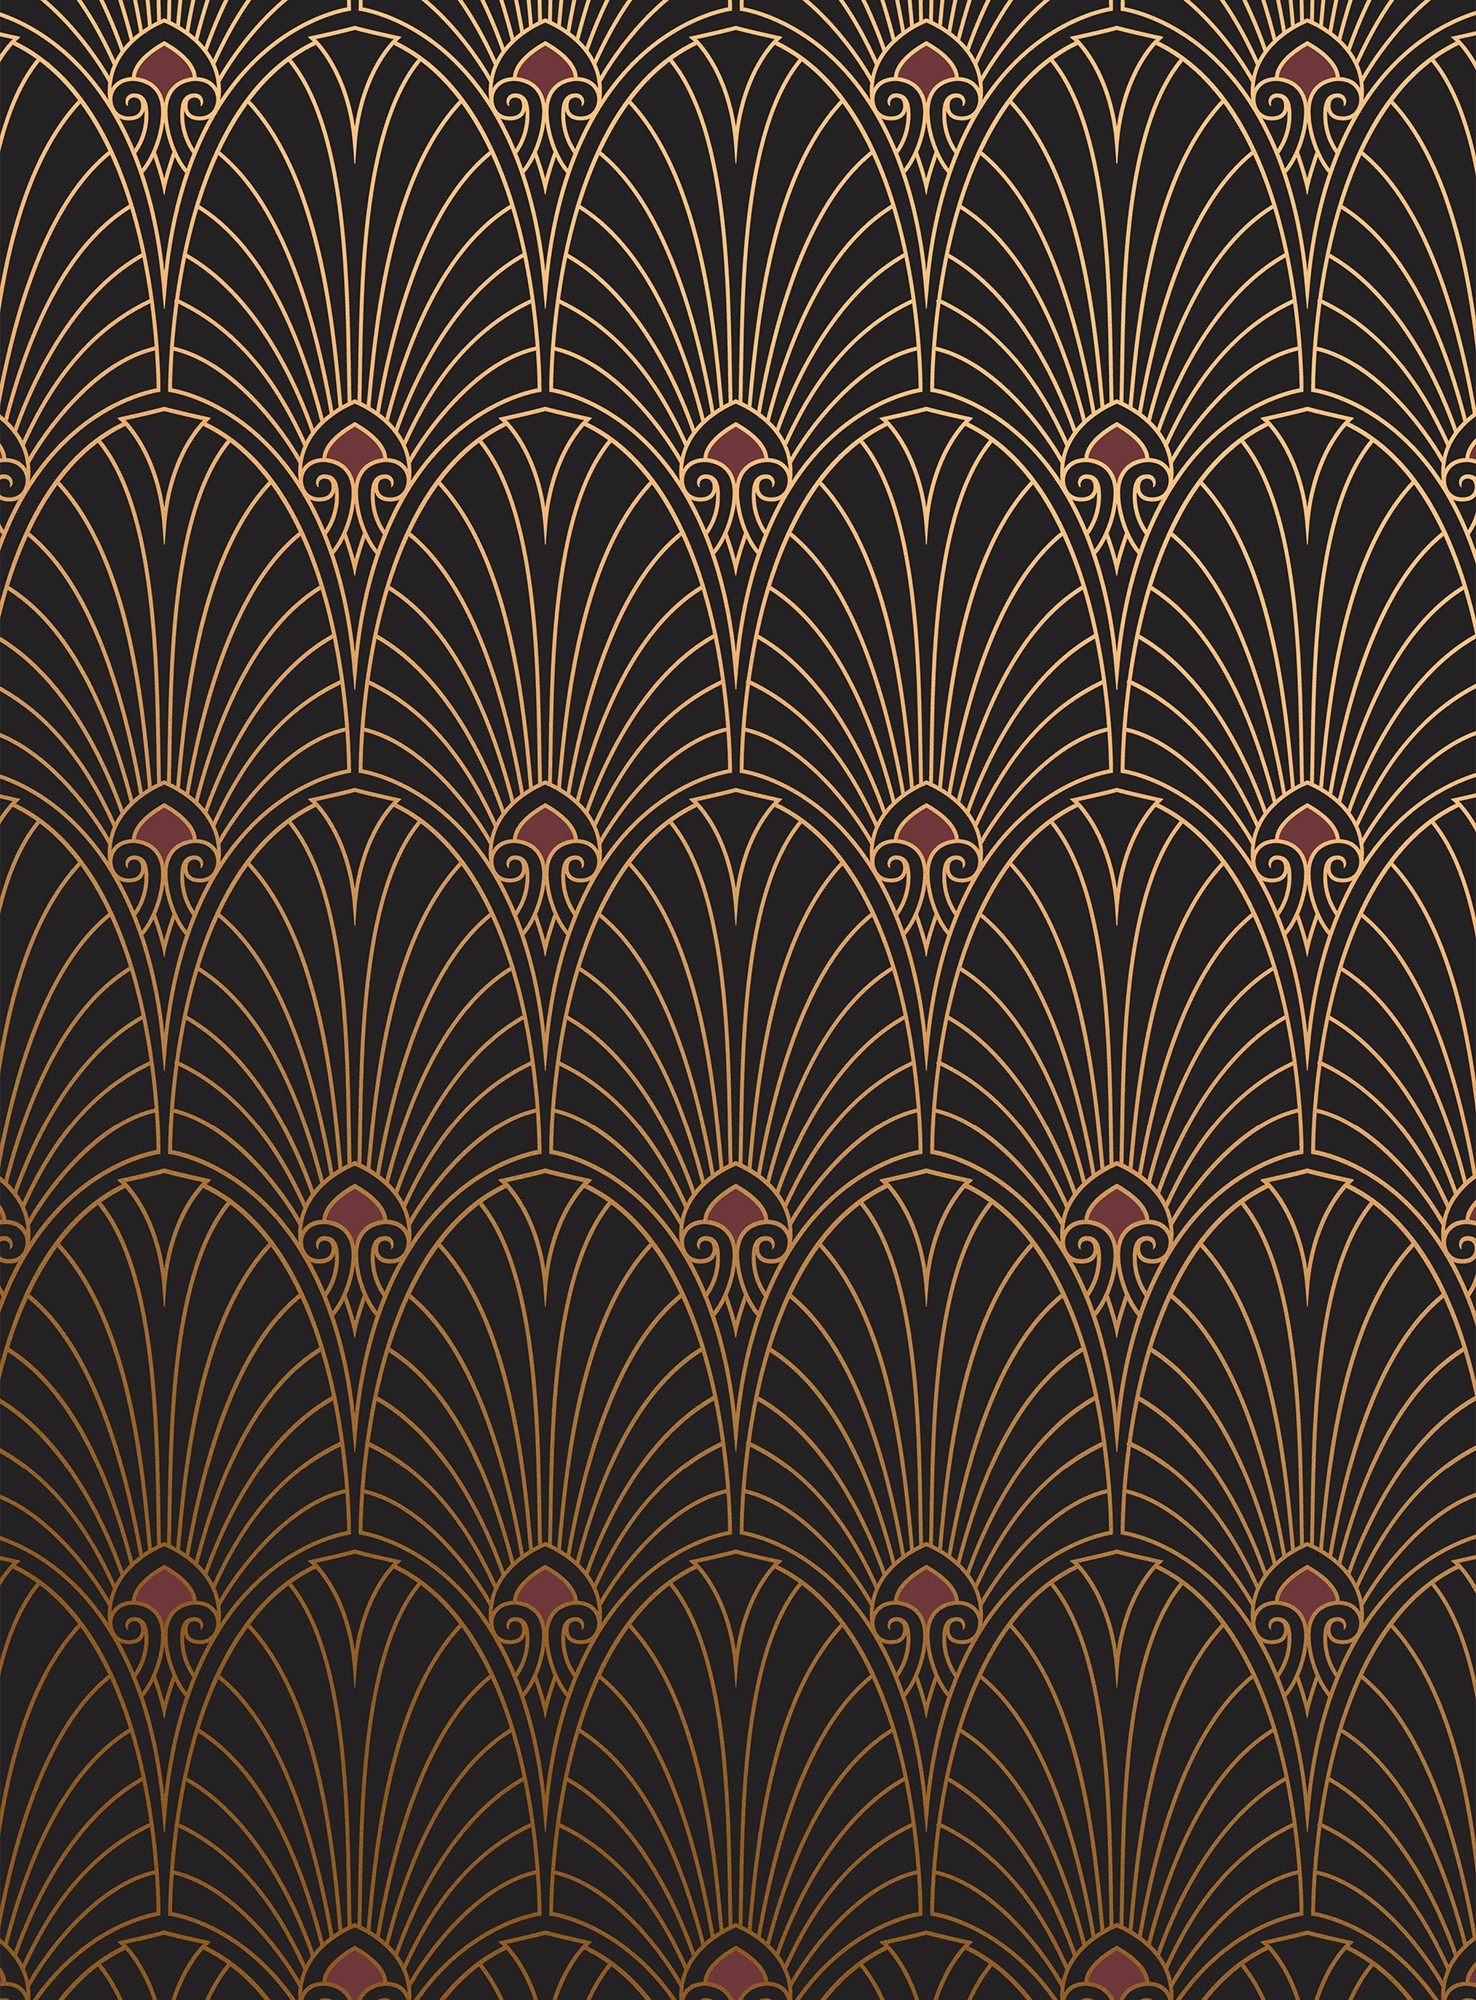  Art Deco  wallpaper   Download free cool HD wallpapers for 